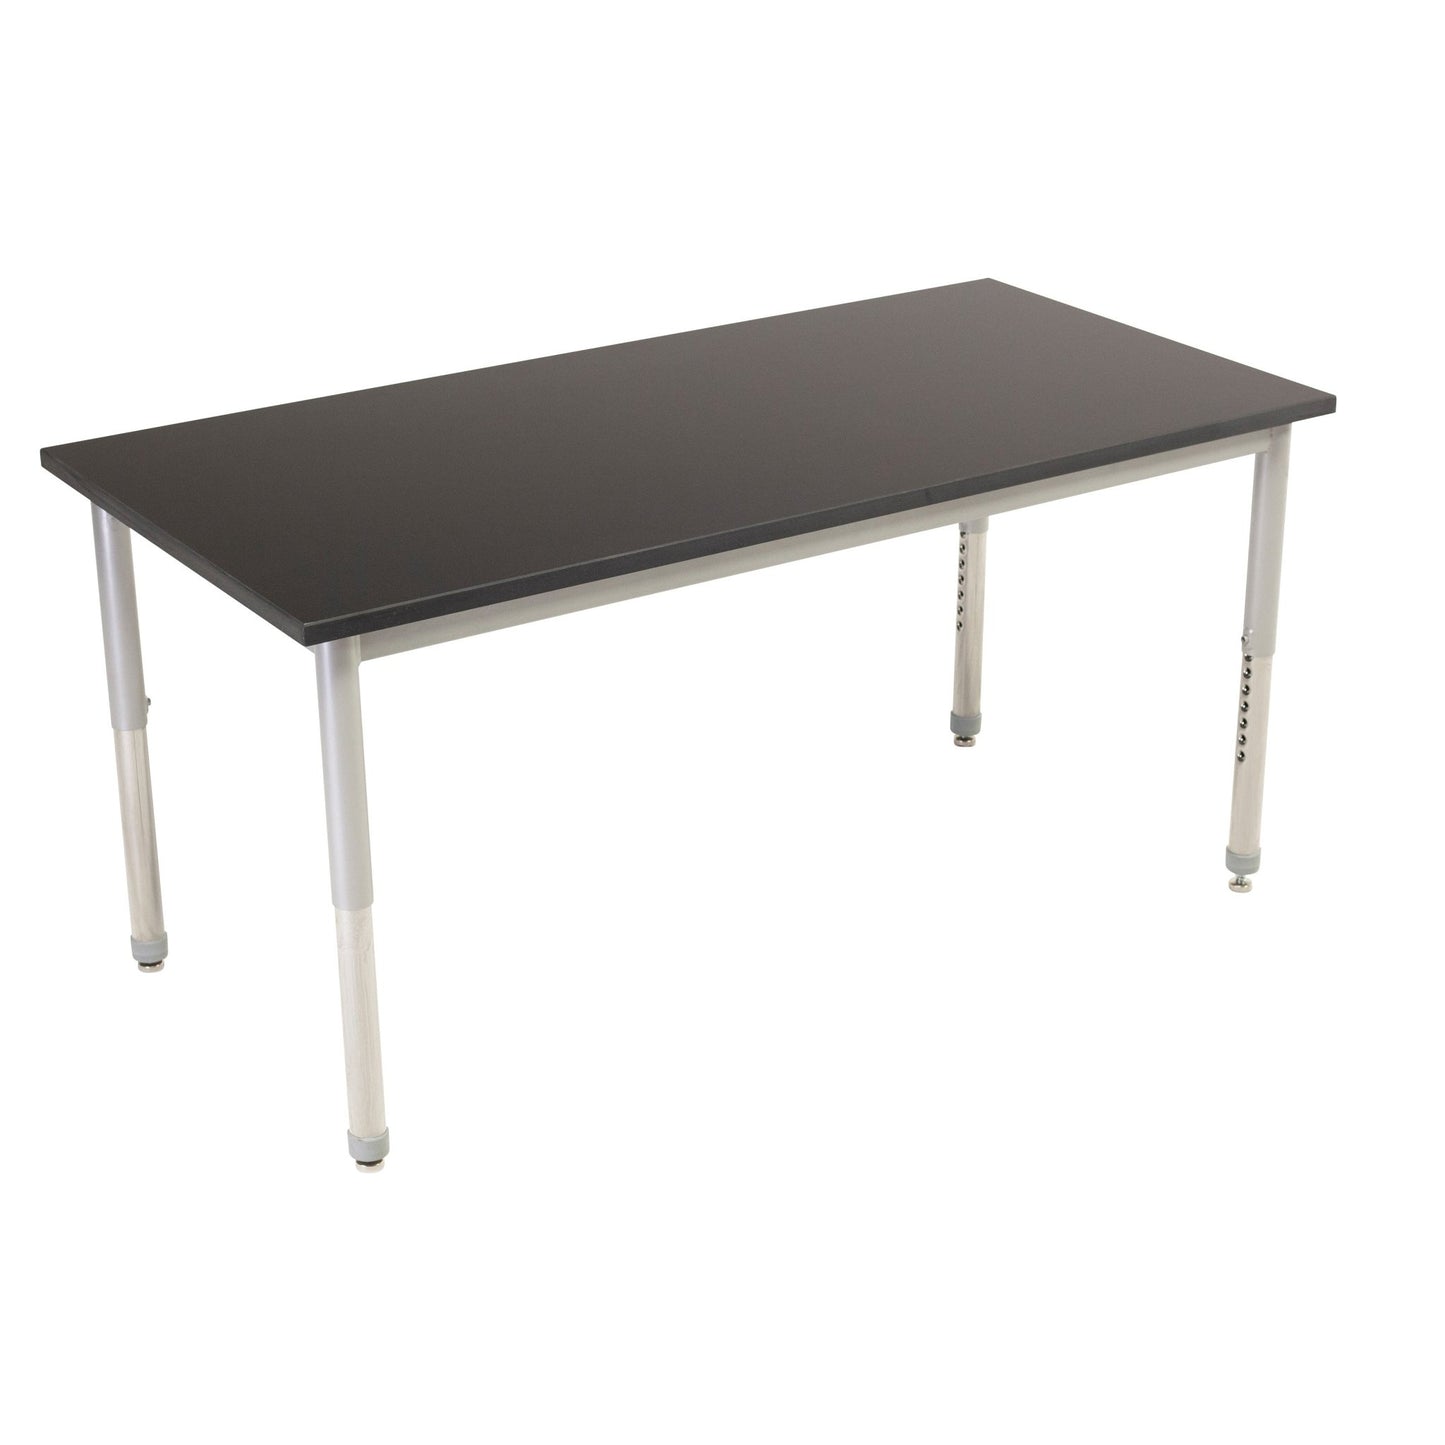 AmTab Science Lab Table - 36"W x 60"L x Adjustable Height 30" to 38" - Phenolic Resin Chem Res Top (AMT-SCI365PR) - SchoolOutlet